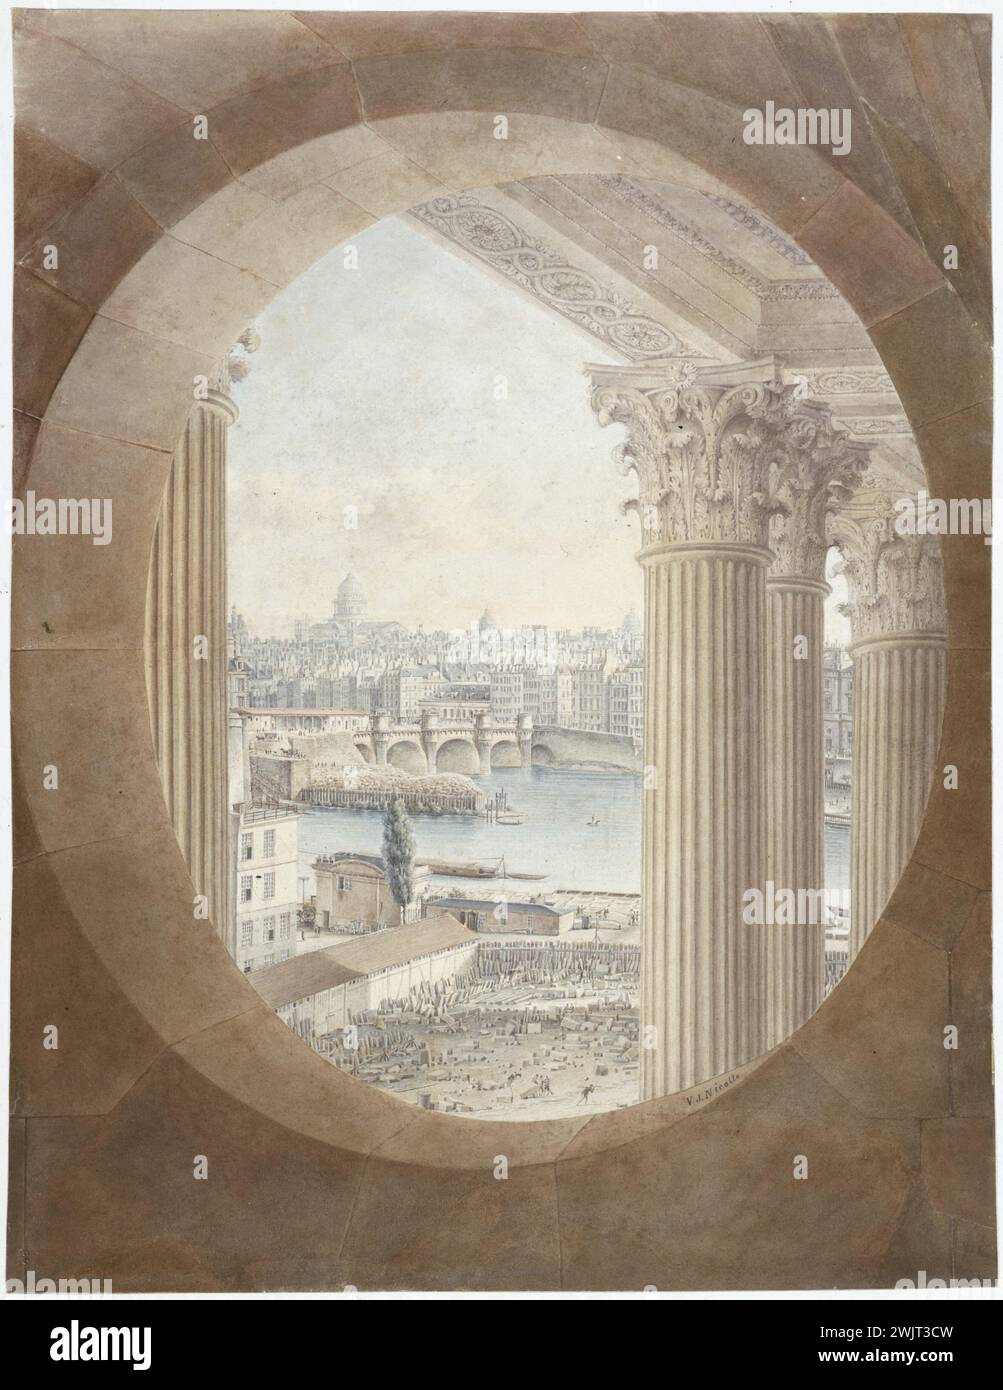 Victor Jean Nicolle (1754-1826). 'View of Paris taken from a Boeuf eye of the Louvre colonnade'. Paris (1 arr.), Carnavalet museum. 23614-7 Colonnade Louvre, column, Seine river, 1st 1 arrondissement, eye of Boeuf, view, city Stock Photo